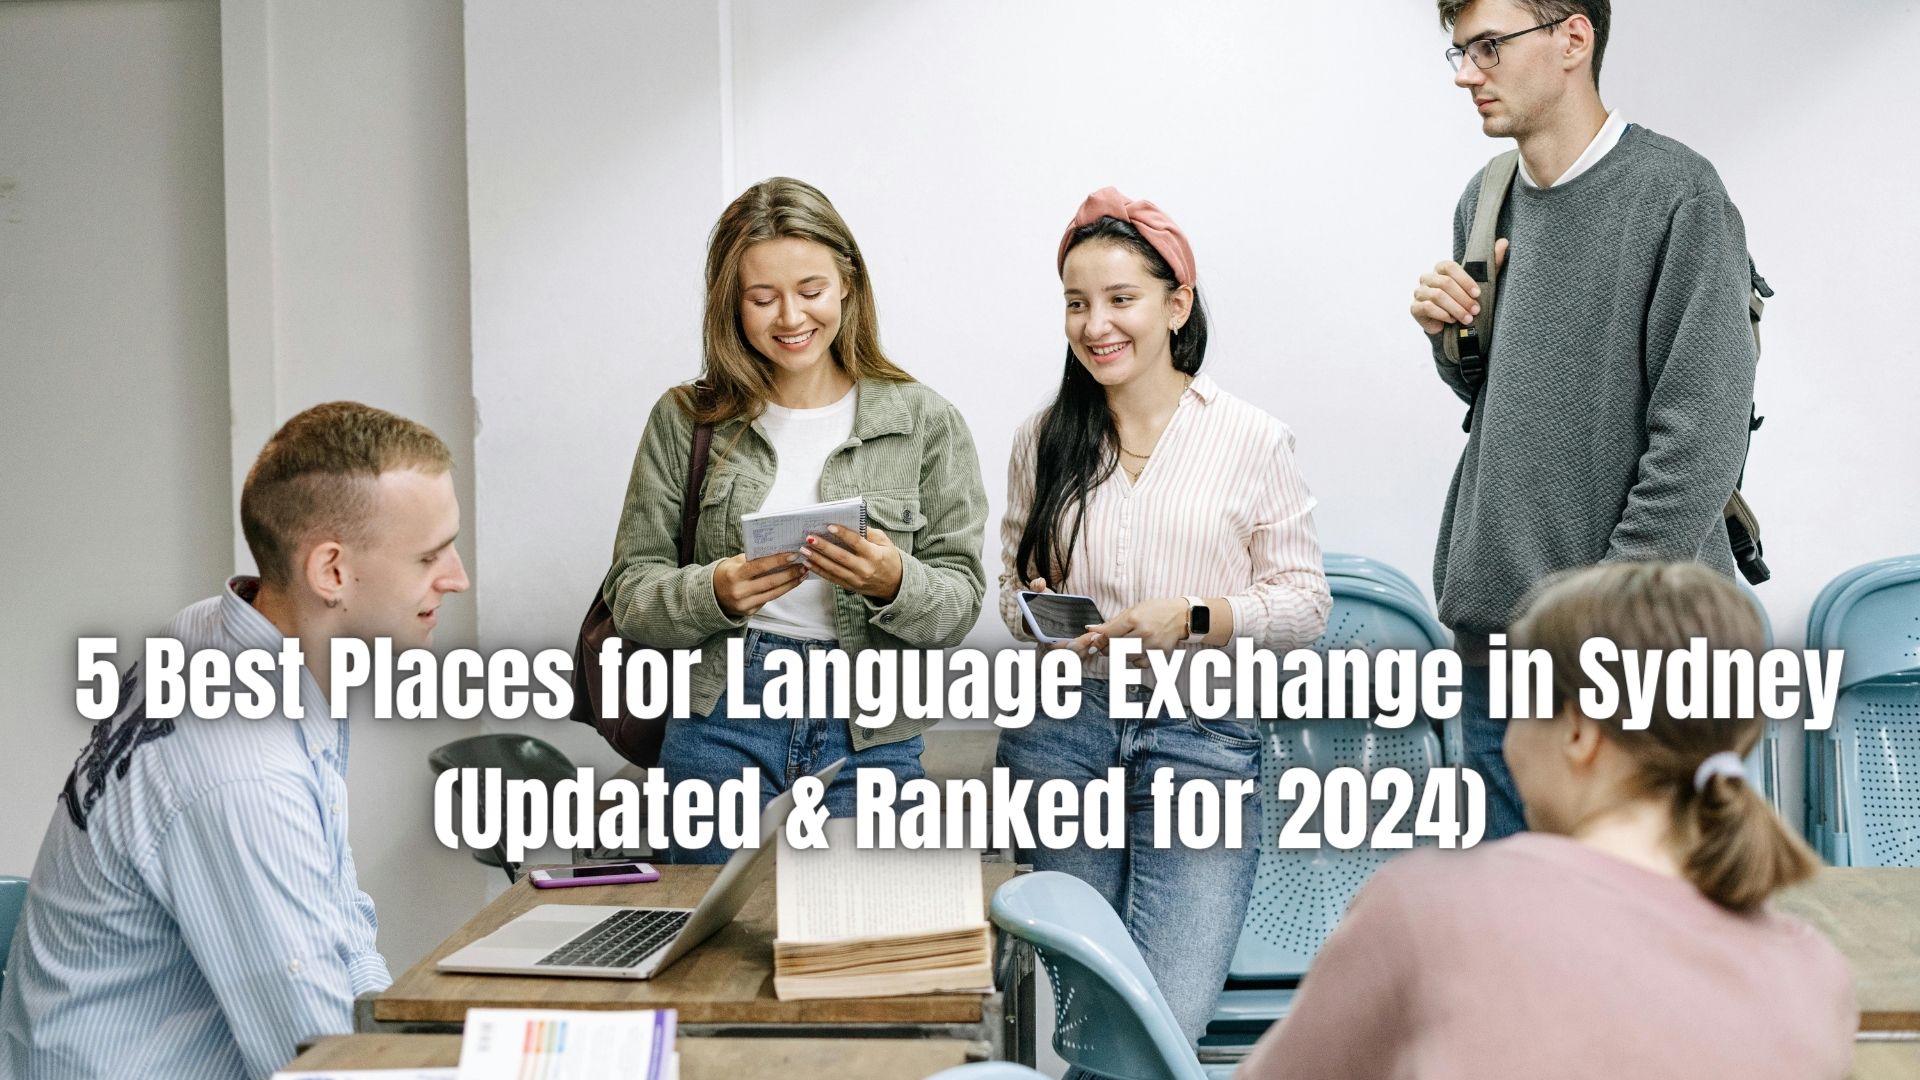 Improve Your Language Skills and Make Friends! Find the best language exchange meetups in Sydney. 5 Top Spots for Conversation and Fun.